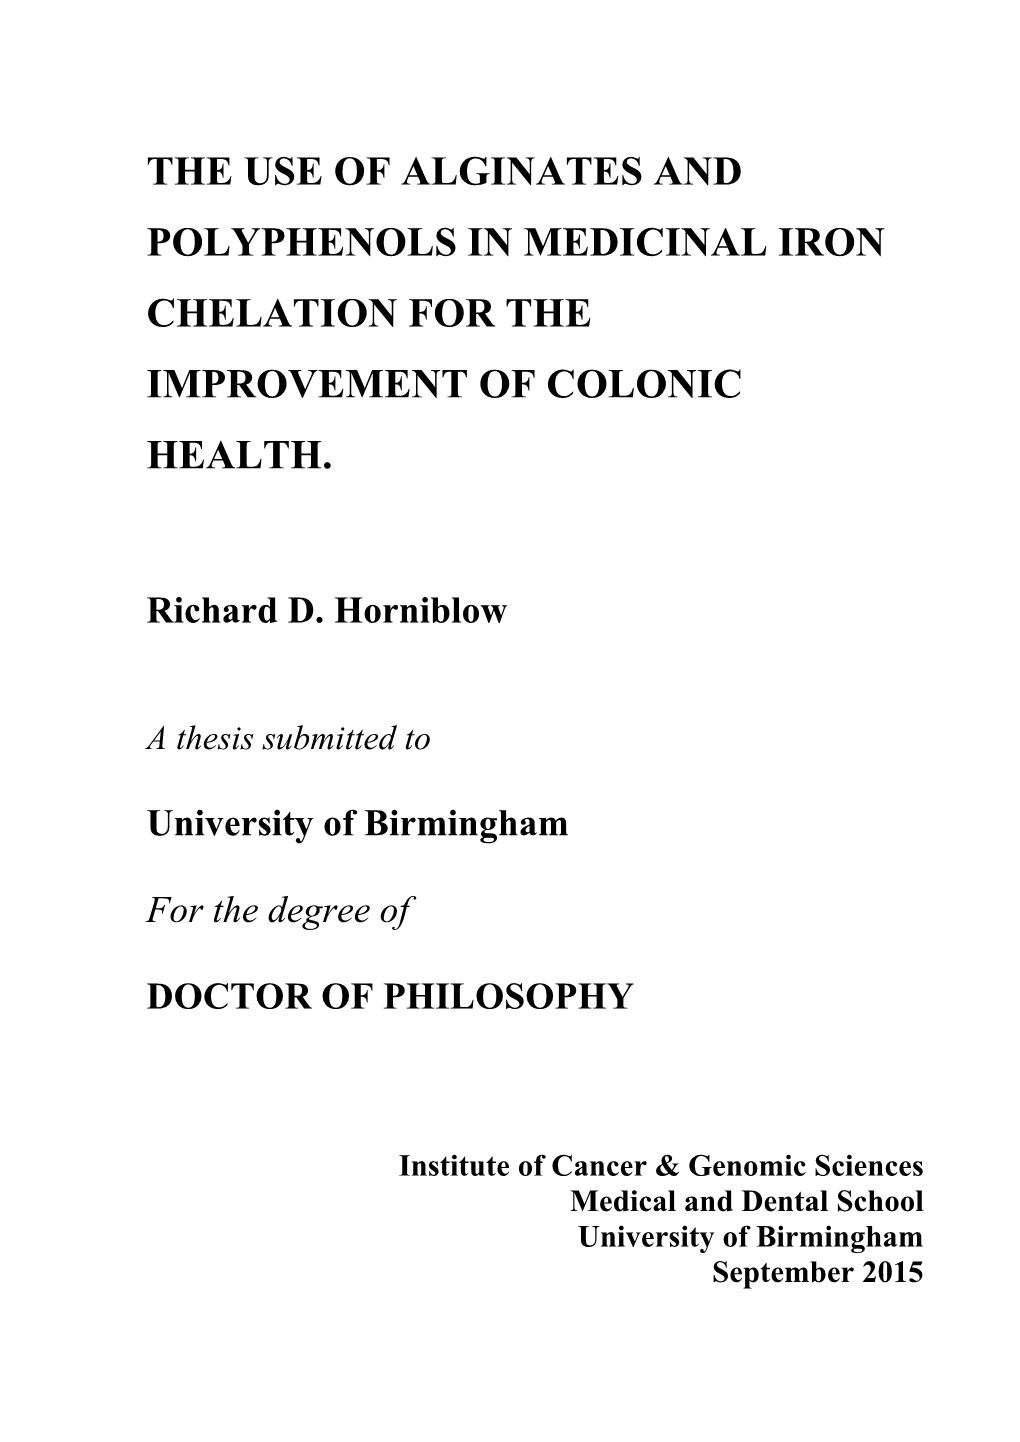 The Use of Alginates and Polyphenols in Medicinal Iron Chelation for the Improvement of Colonic Health